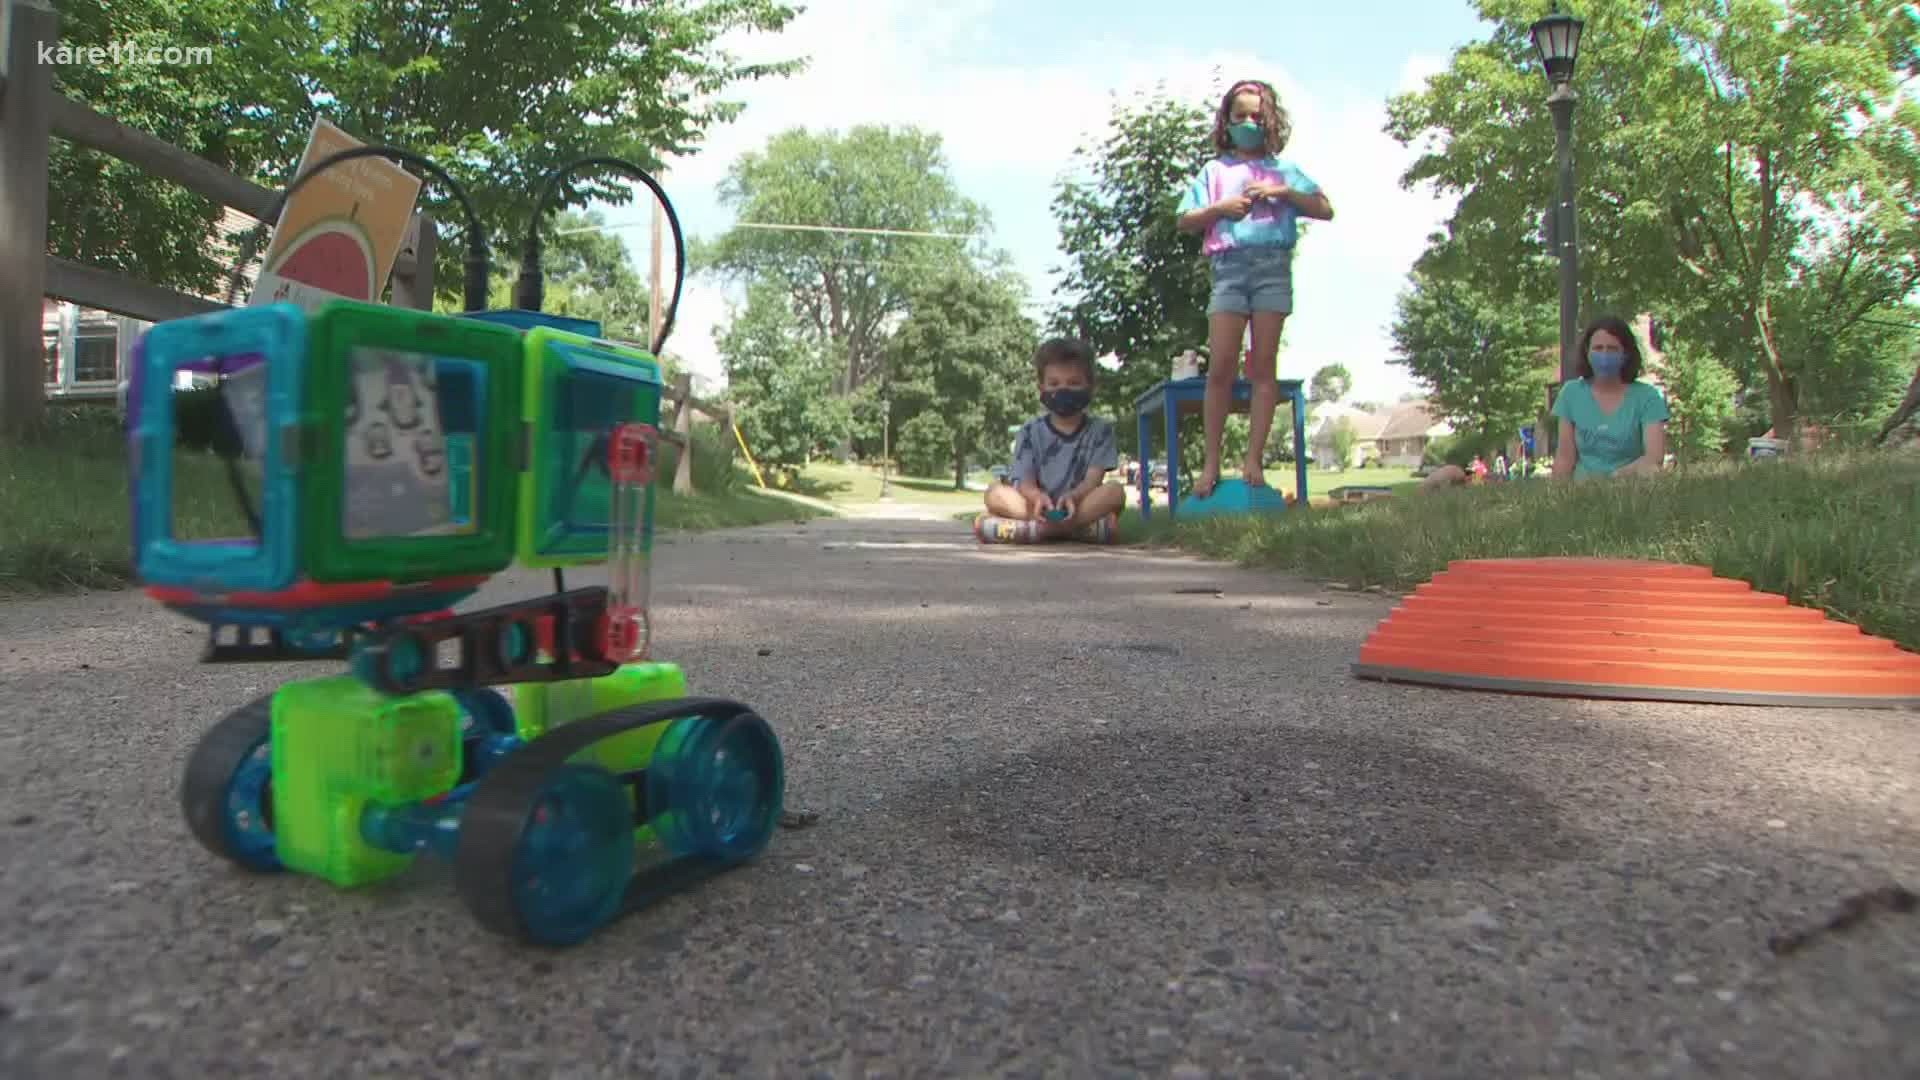 St. Paul kids build robot to deliver lemonade at socially distanced stand